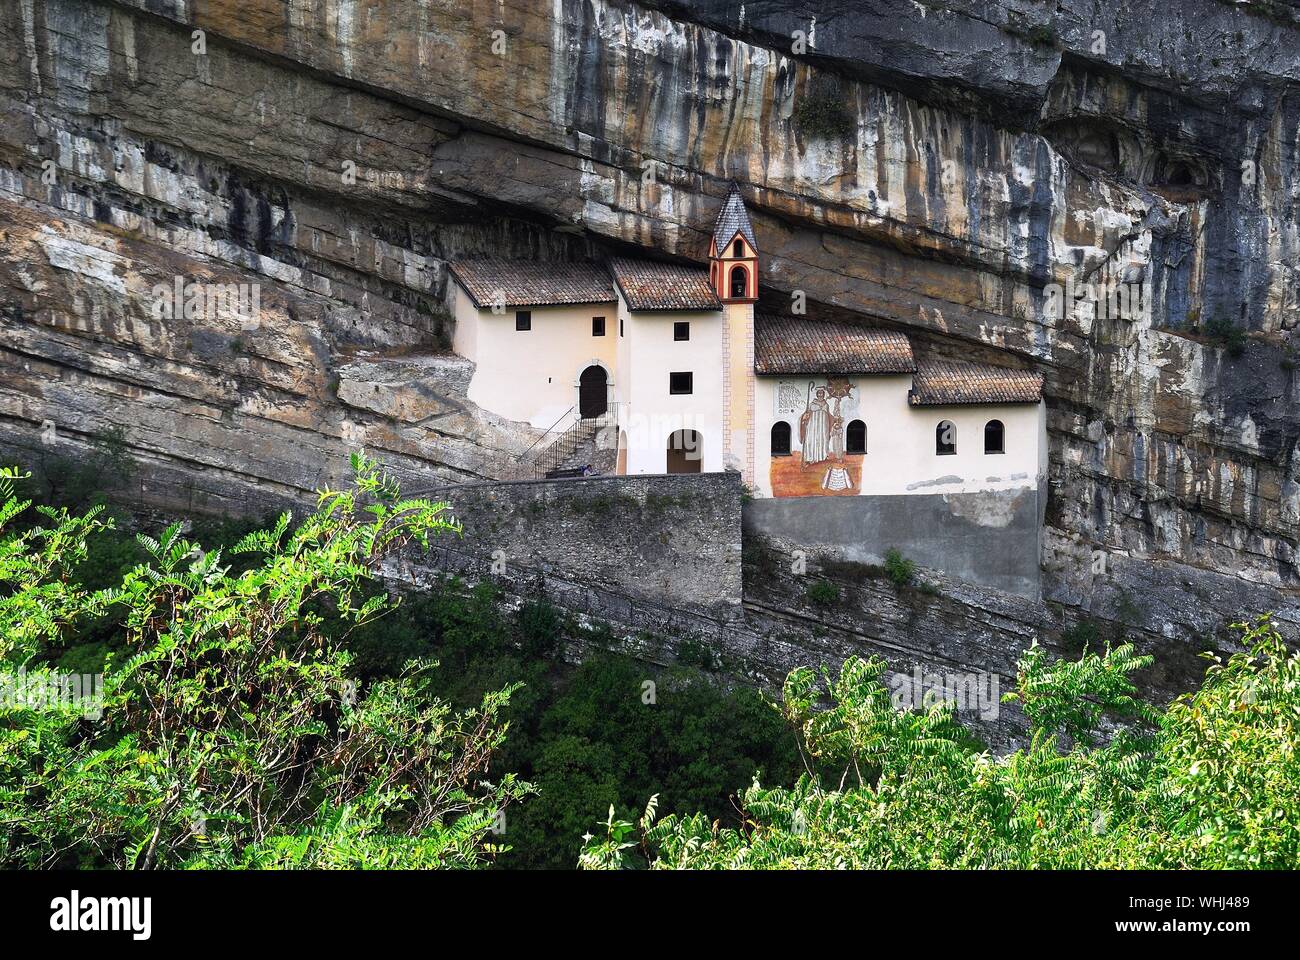 Trentino Alto Adige, Italy. The Eremo di San Colombano is a hermitage in Trambileno,  notable for its location in the side of a mountain. Stock Photo